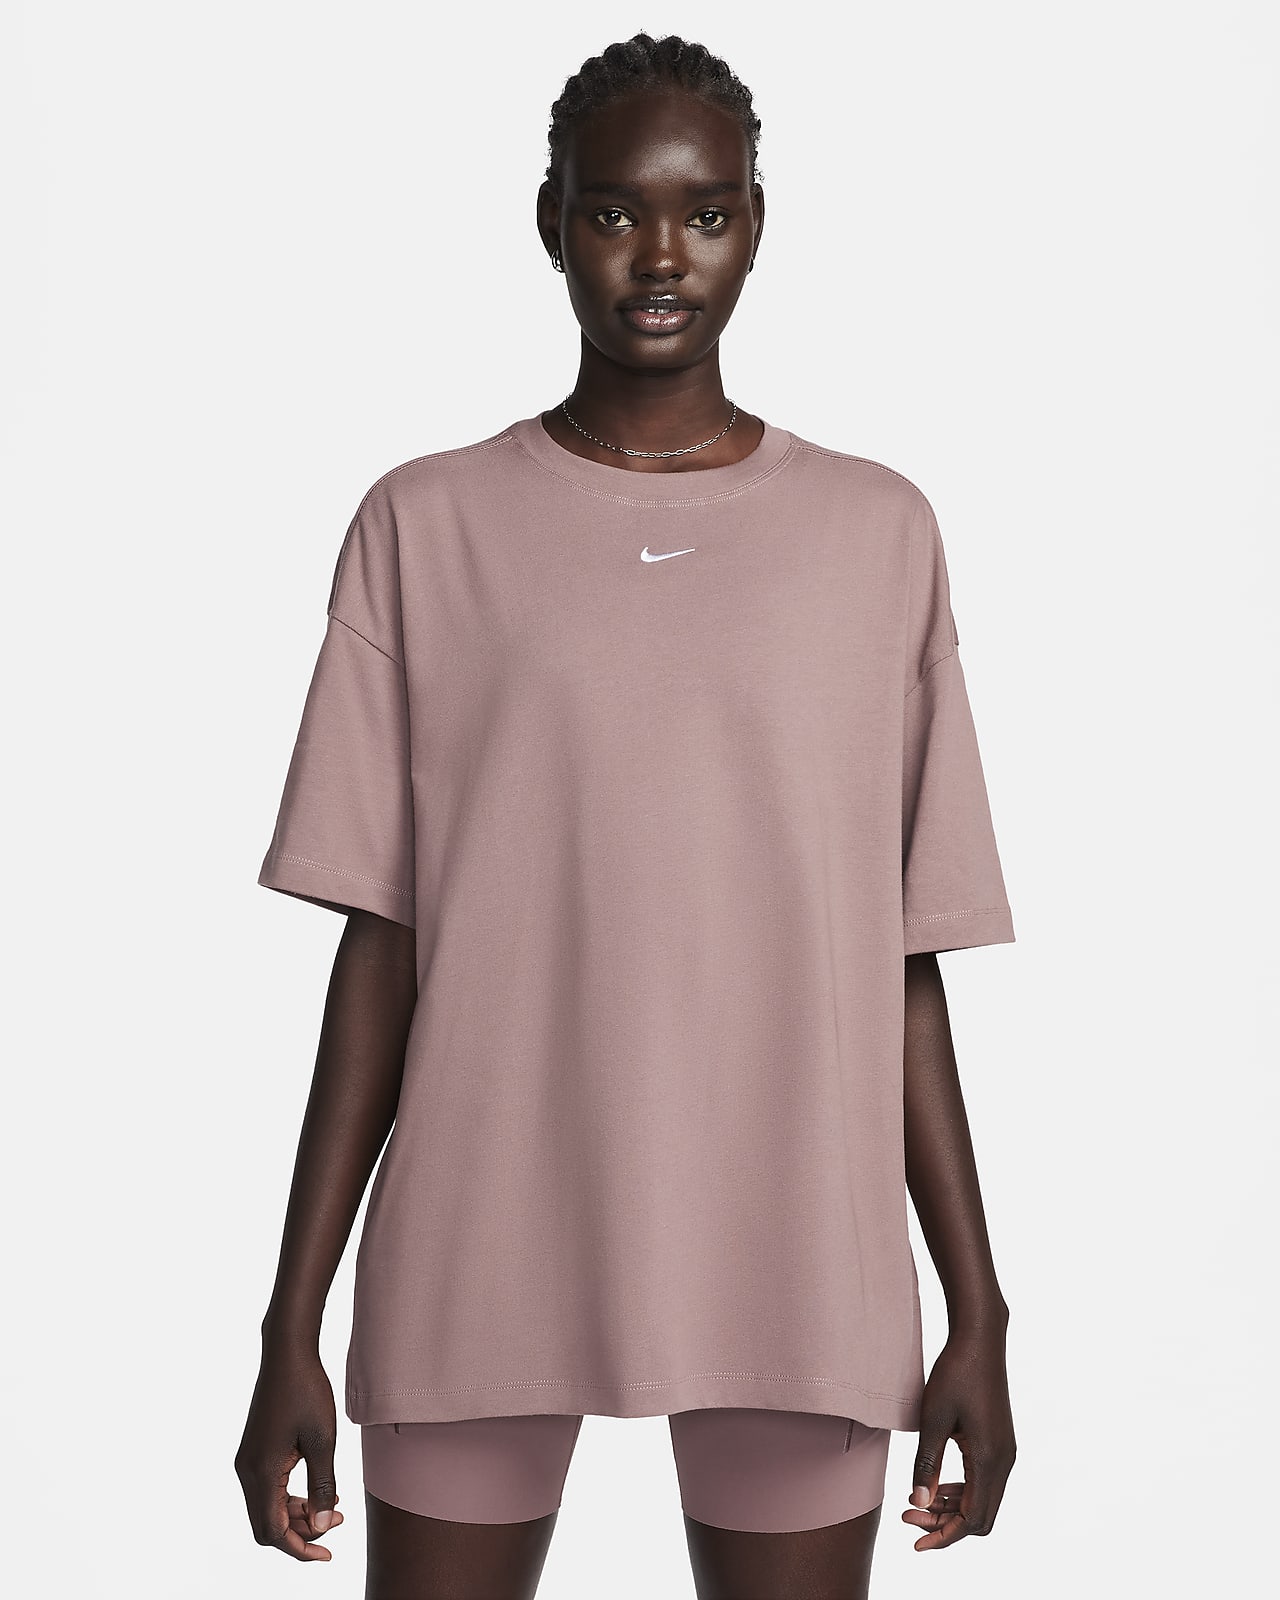 https://static.nike.com/a/images/t_PDP_1280_v1/f_auto,q_auto:eco/ed7c20fc-aad7-42f5-b509-127a3d71e62e/sportswear-essential-womens-oversized-t-shirt-3mqX5R.png